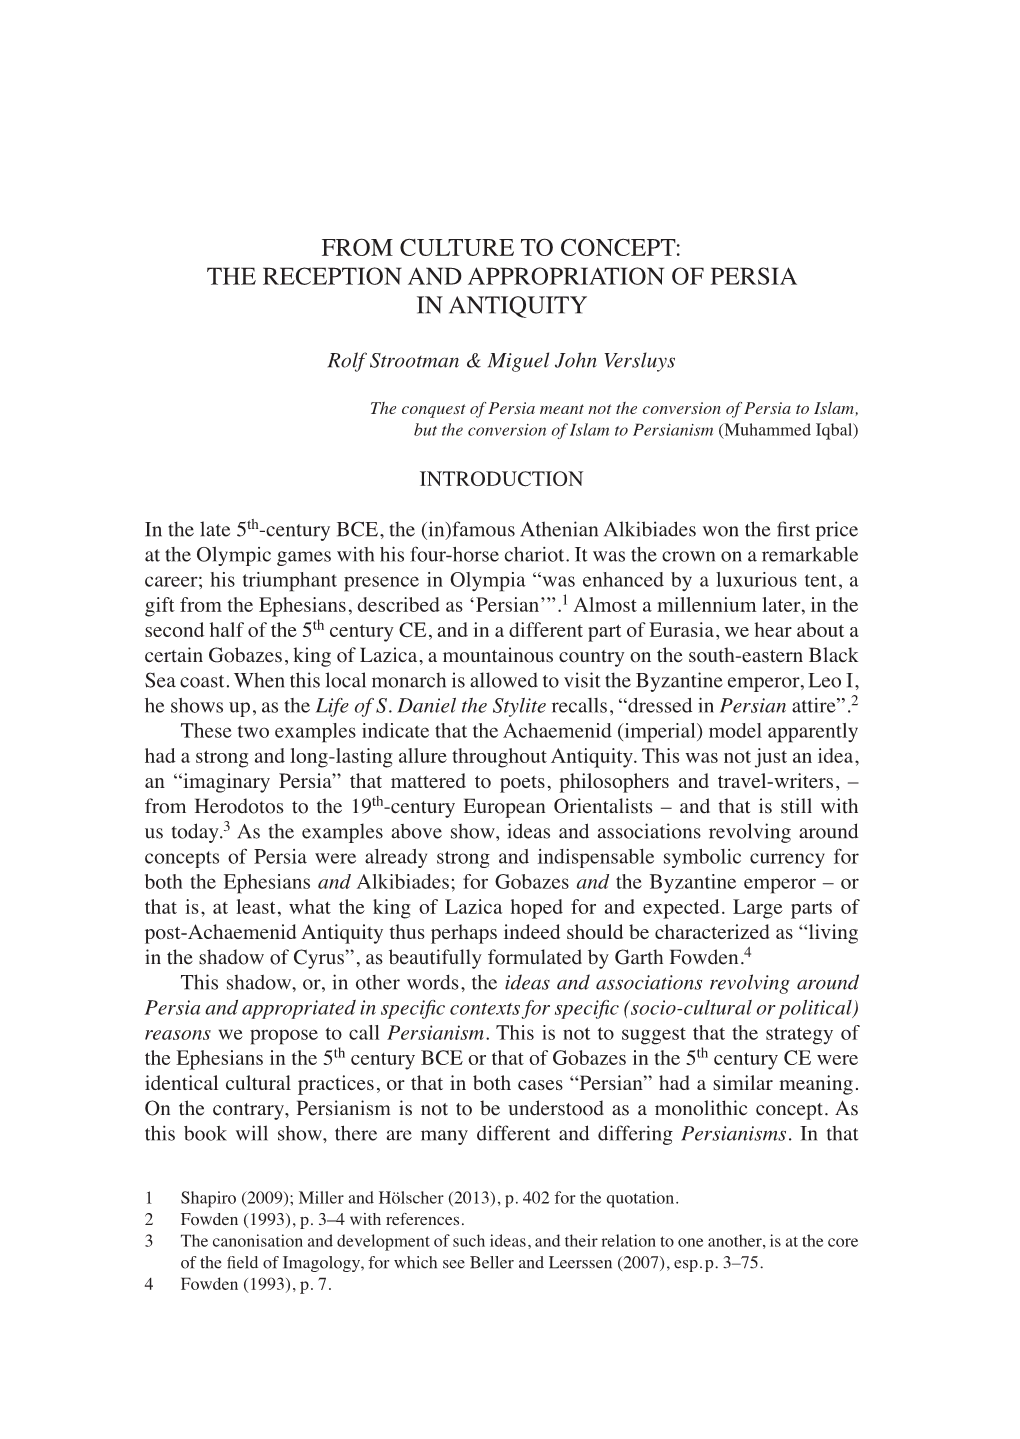 The Reception and Appropriation of Persia in Antiquity